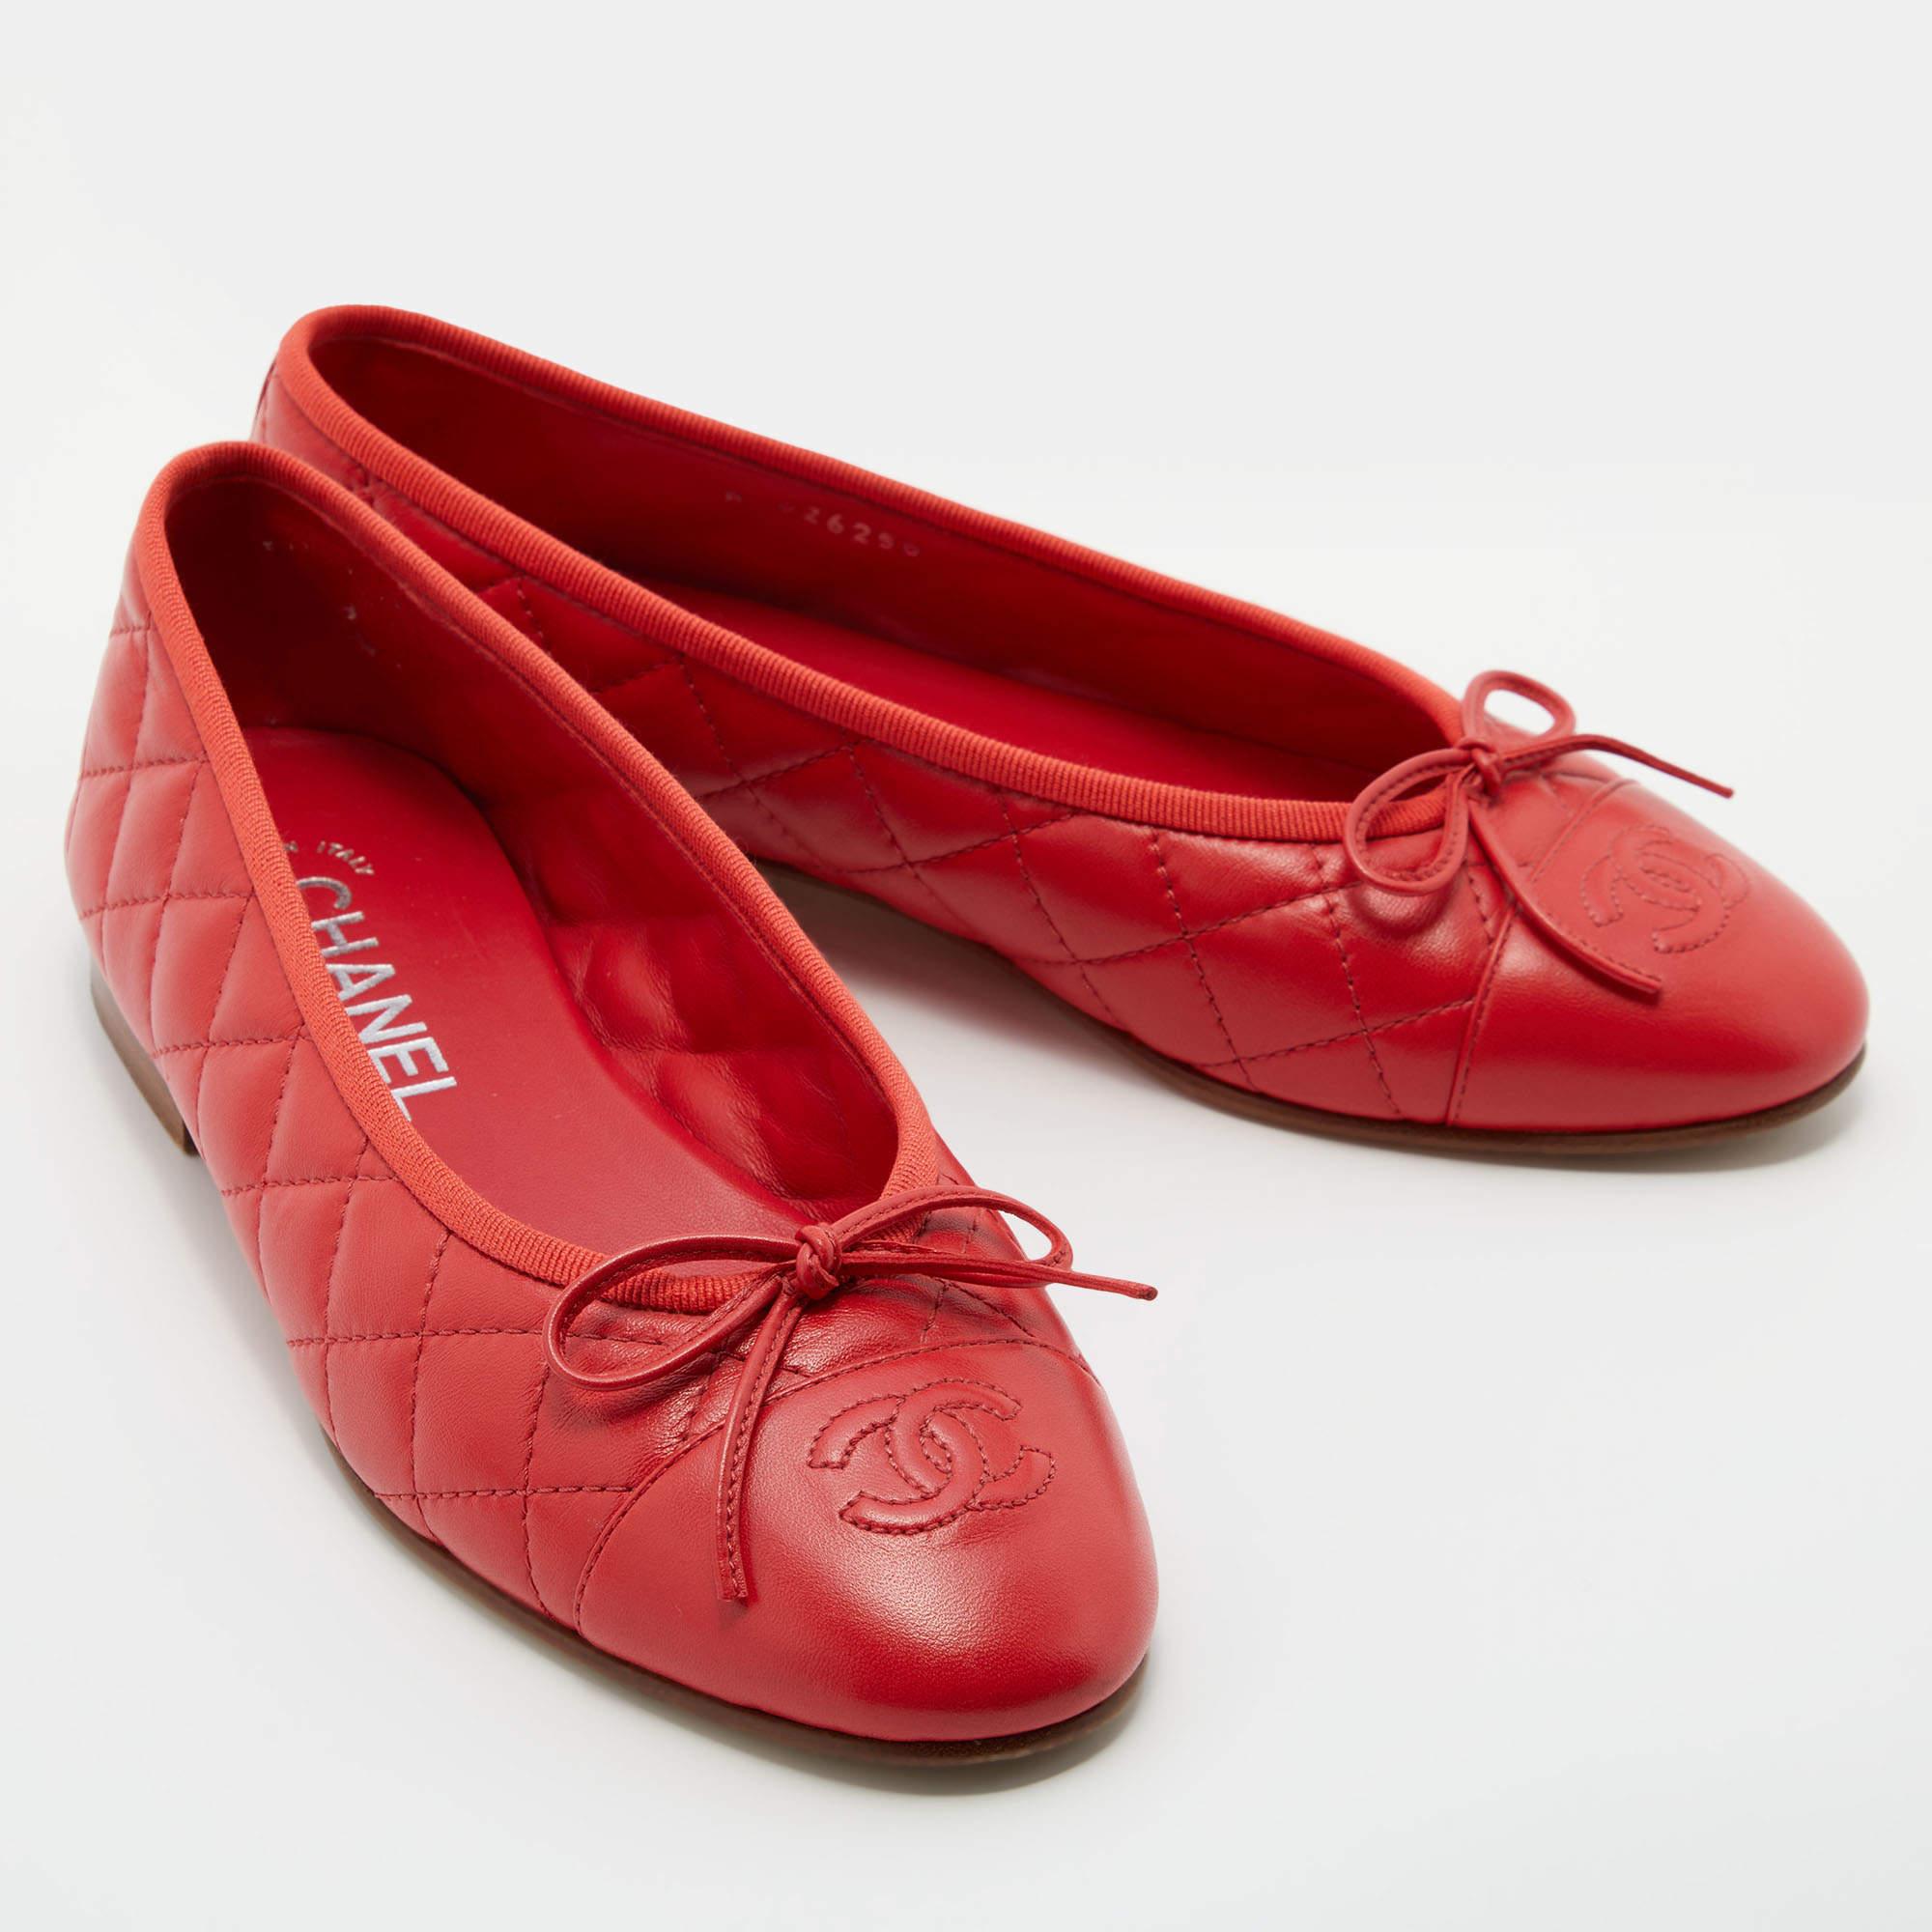 Chanel Red Quilted Leather CC Bow Cap Toe Ballet Flats Size 37 1